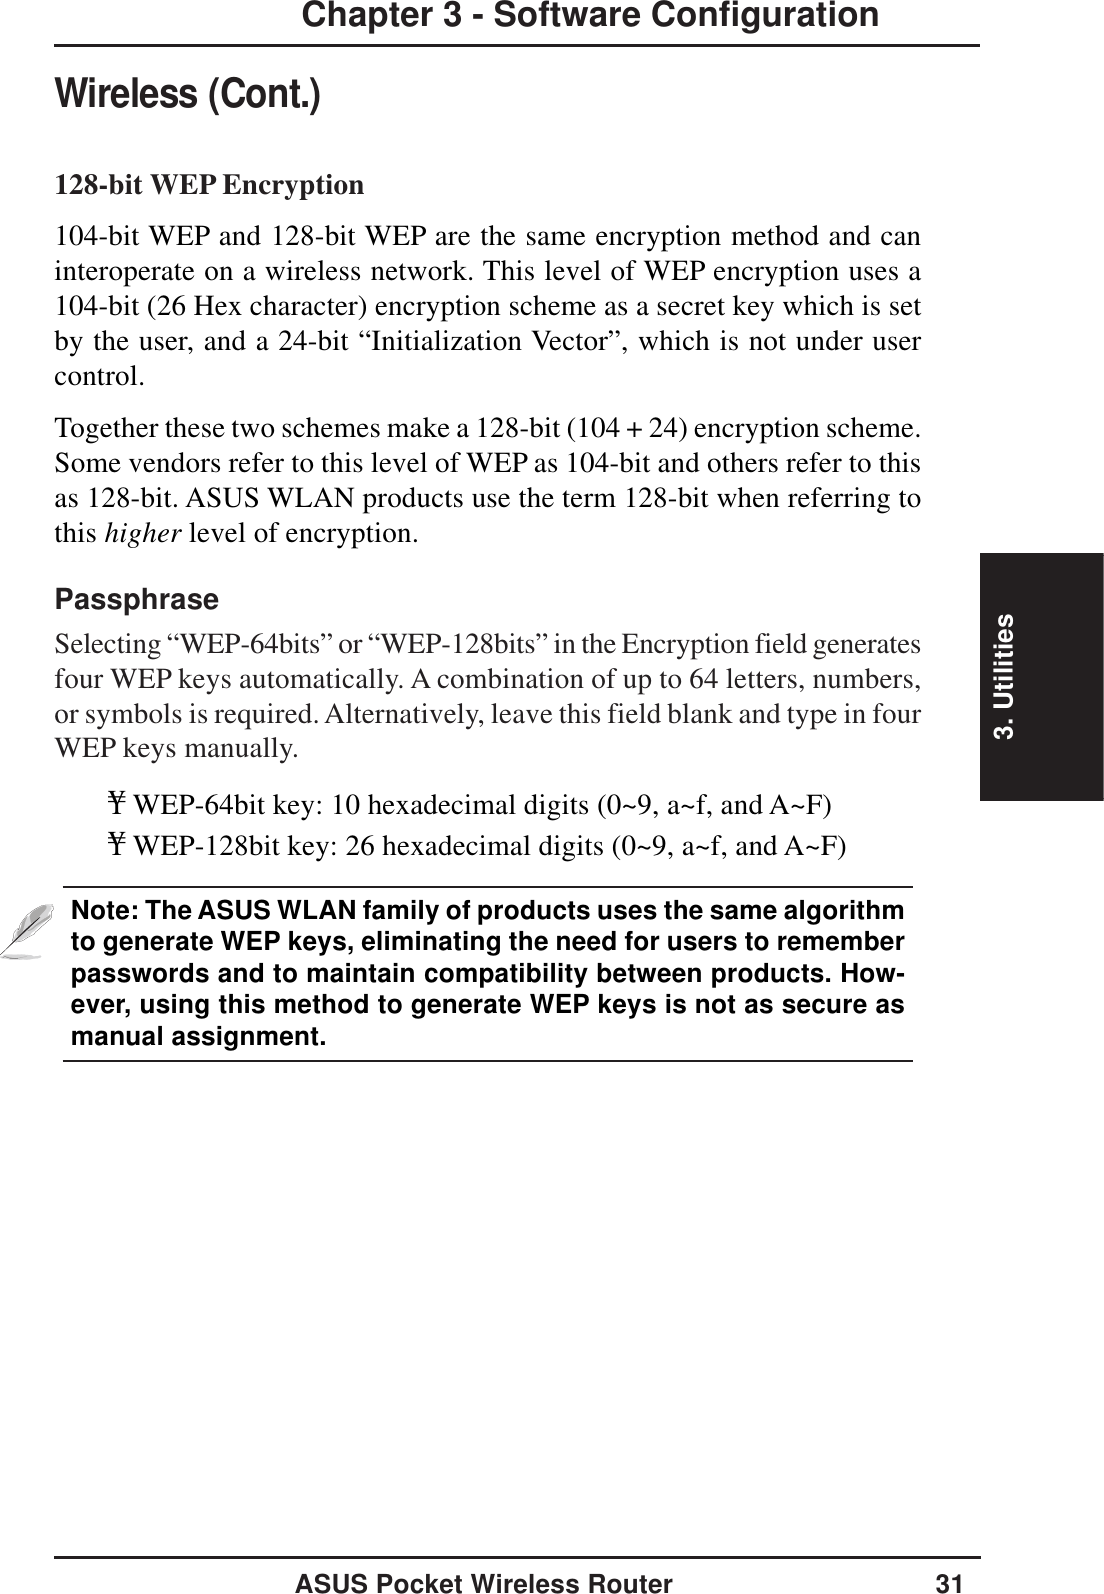 3. UtilitiesASUS Pocket Wireless Router 31Chapter 3 - Software ConfigurationWireless (Cont.)128-bit WEP Encryption104-bit WEP and 128-bit WEP are the same encryption method and caninteroperate on a wireless network. This level of WEP encryption uses a104-bit (26 Hex character) encryption scheme as a secret key which is setby the user, and a 24-bit “Initialization Vector”, which is not under usercontrol.Together these two schemes make a 128-bit (104 + 24) encryption scheme.Some vendors refer to this level of WEP as 104-bit and others refer to thisas 128-bit. ASUS WLAN products use the term 128-bit when referring tothis higher level of encryption.PassphraseSelecting “WEP-64bits” or “WEP-128bits” in the Encryption field generatesfour WEP keys automatically. A combination of up to 64 letters, numbers,or symbols is required. Alternatively, leave this field blank and type in fourWEP keys manually.¥WEP-64bit key: 10 hexadecimal digits (0~9, a~f, and A~F)¥WEP-128bit key: 26 hexadecimal digits (0~9, a~f, and A~F)Note: The ASUS WLAN family of products uses the same algorithmto generate WEP keys, eliminating the need for users to rememberpasswords and to maintain compatibility between products. How-ever, using this method to generate WEP keys is not as secure asmanual assignment.